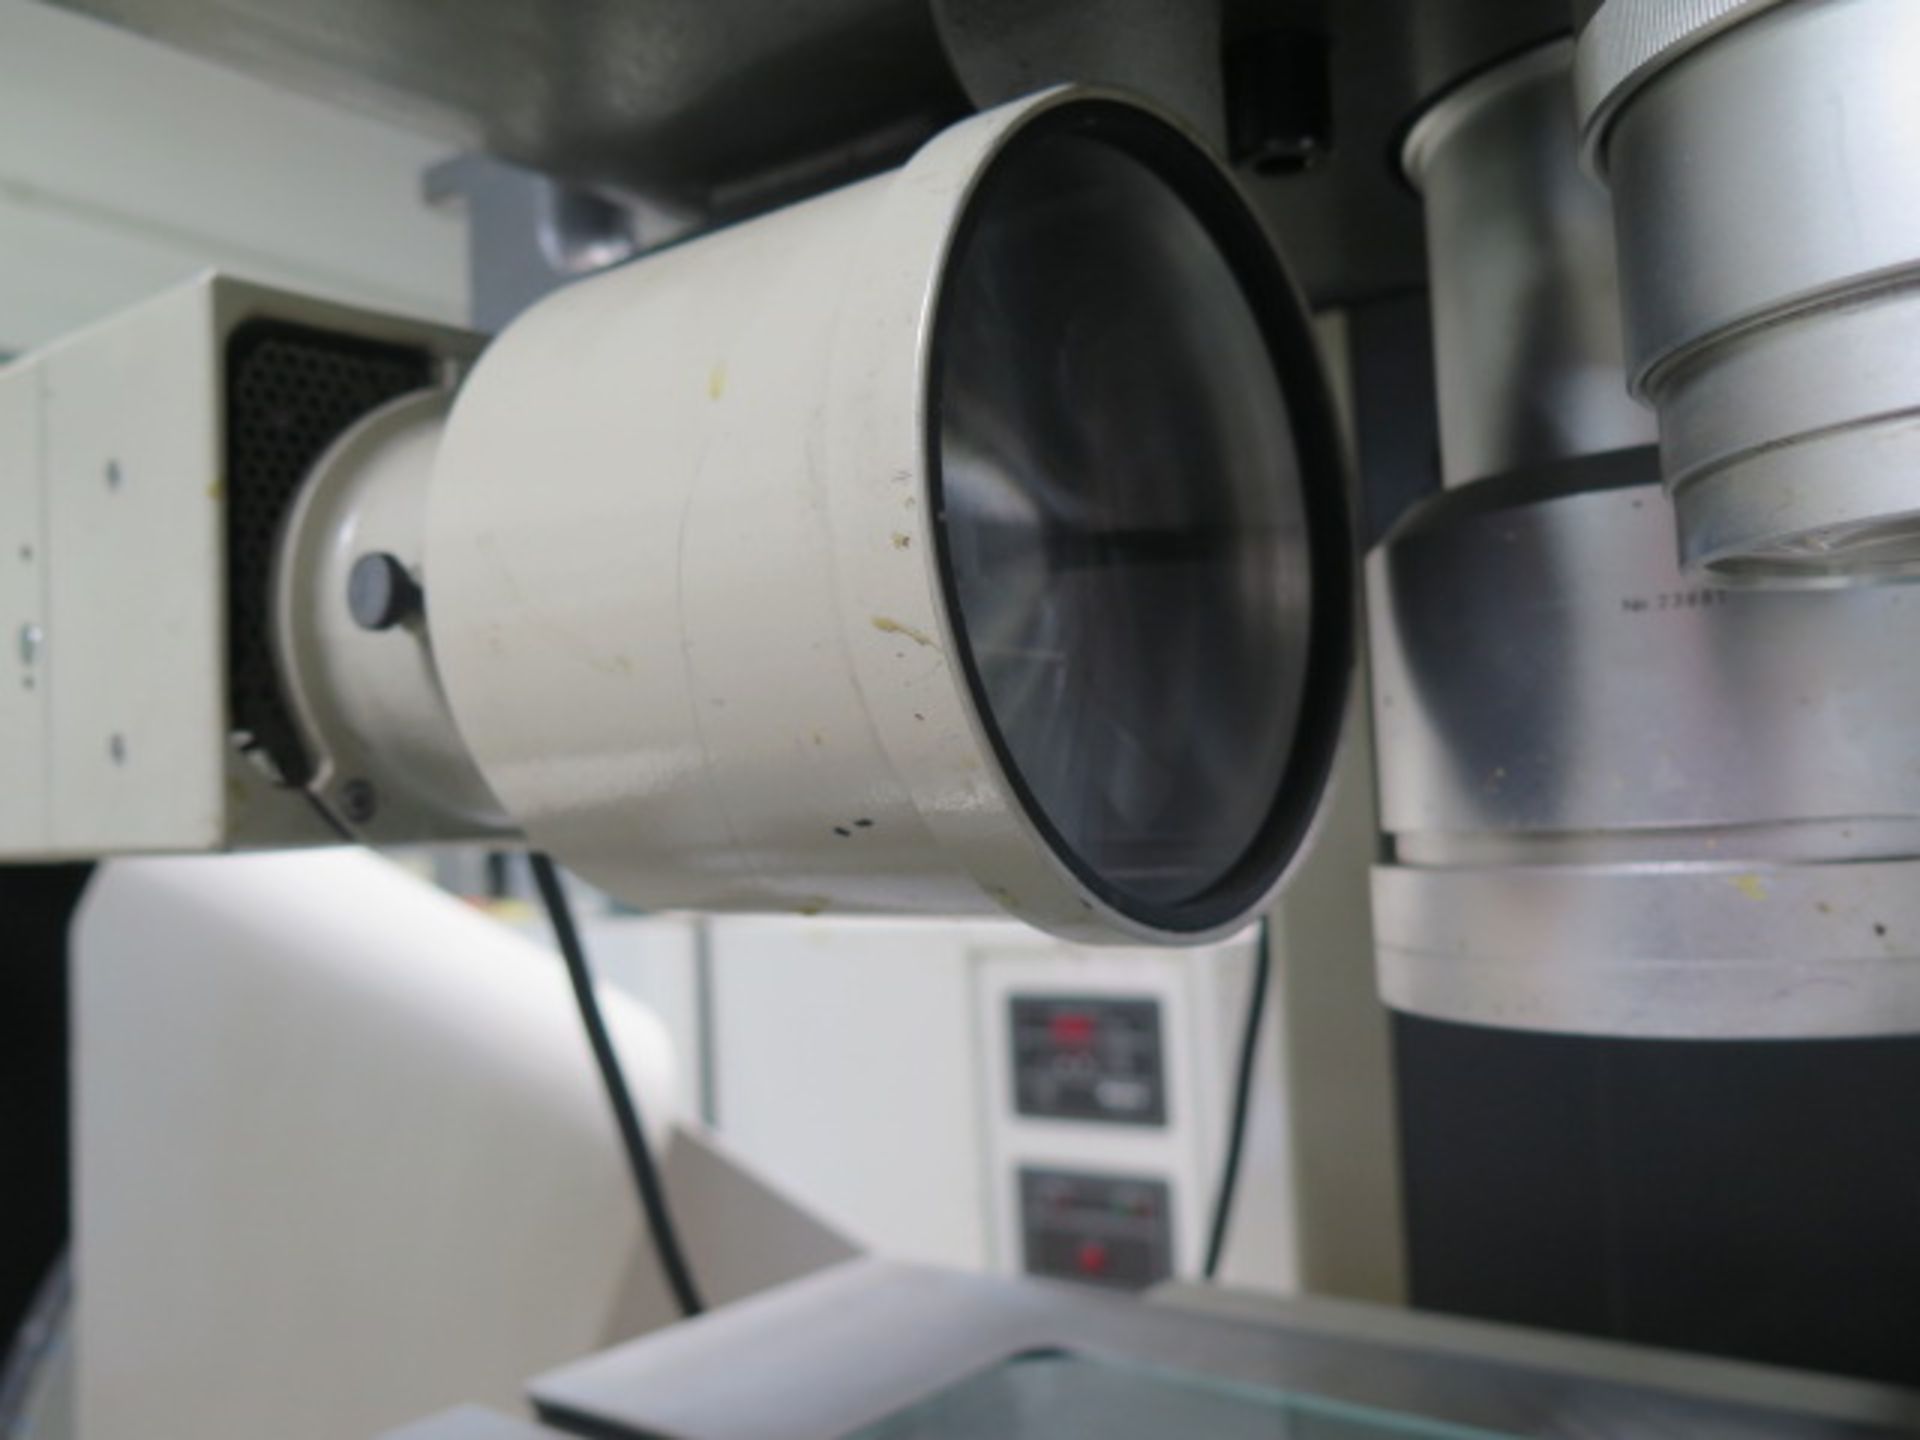 Nikon V-20A 20” Floor Model Optical Comparator w/ 5X, 10X and 50X Objectives, Sold AS IS - Image 7 of 9